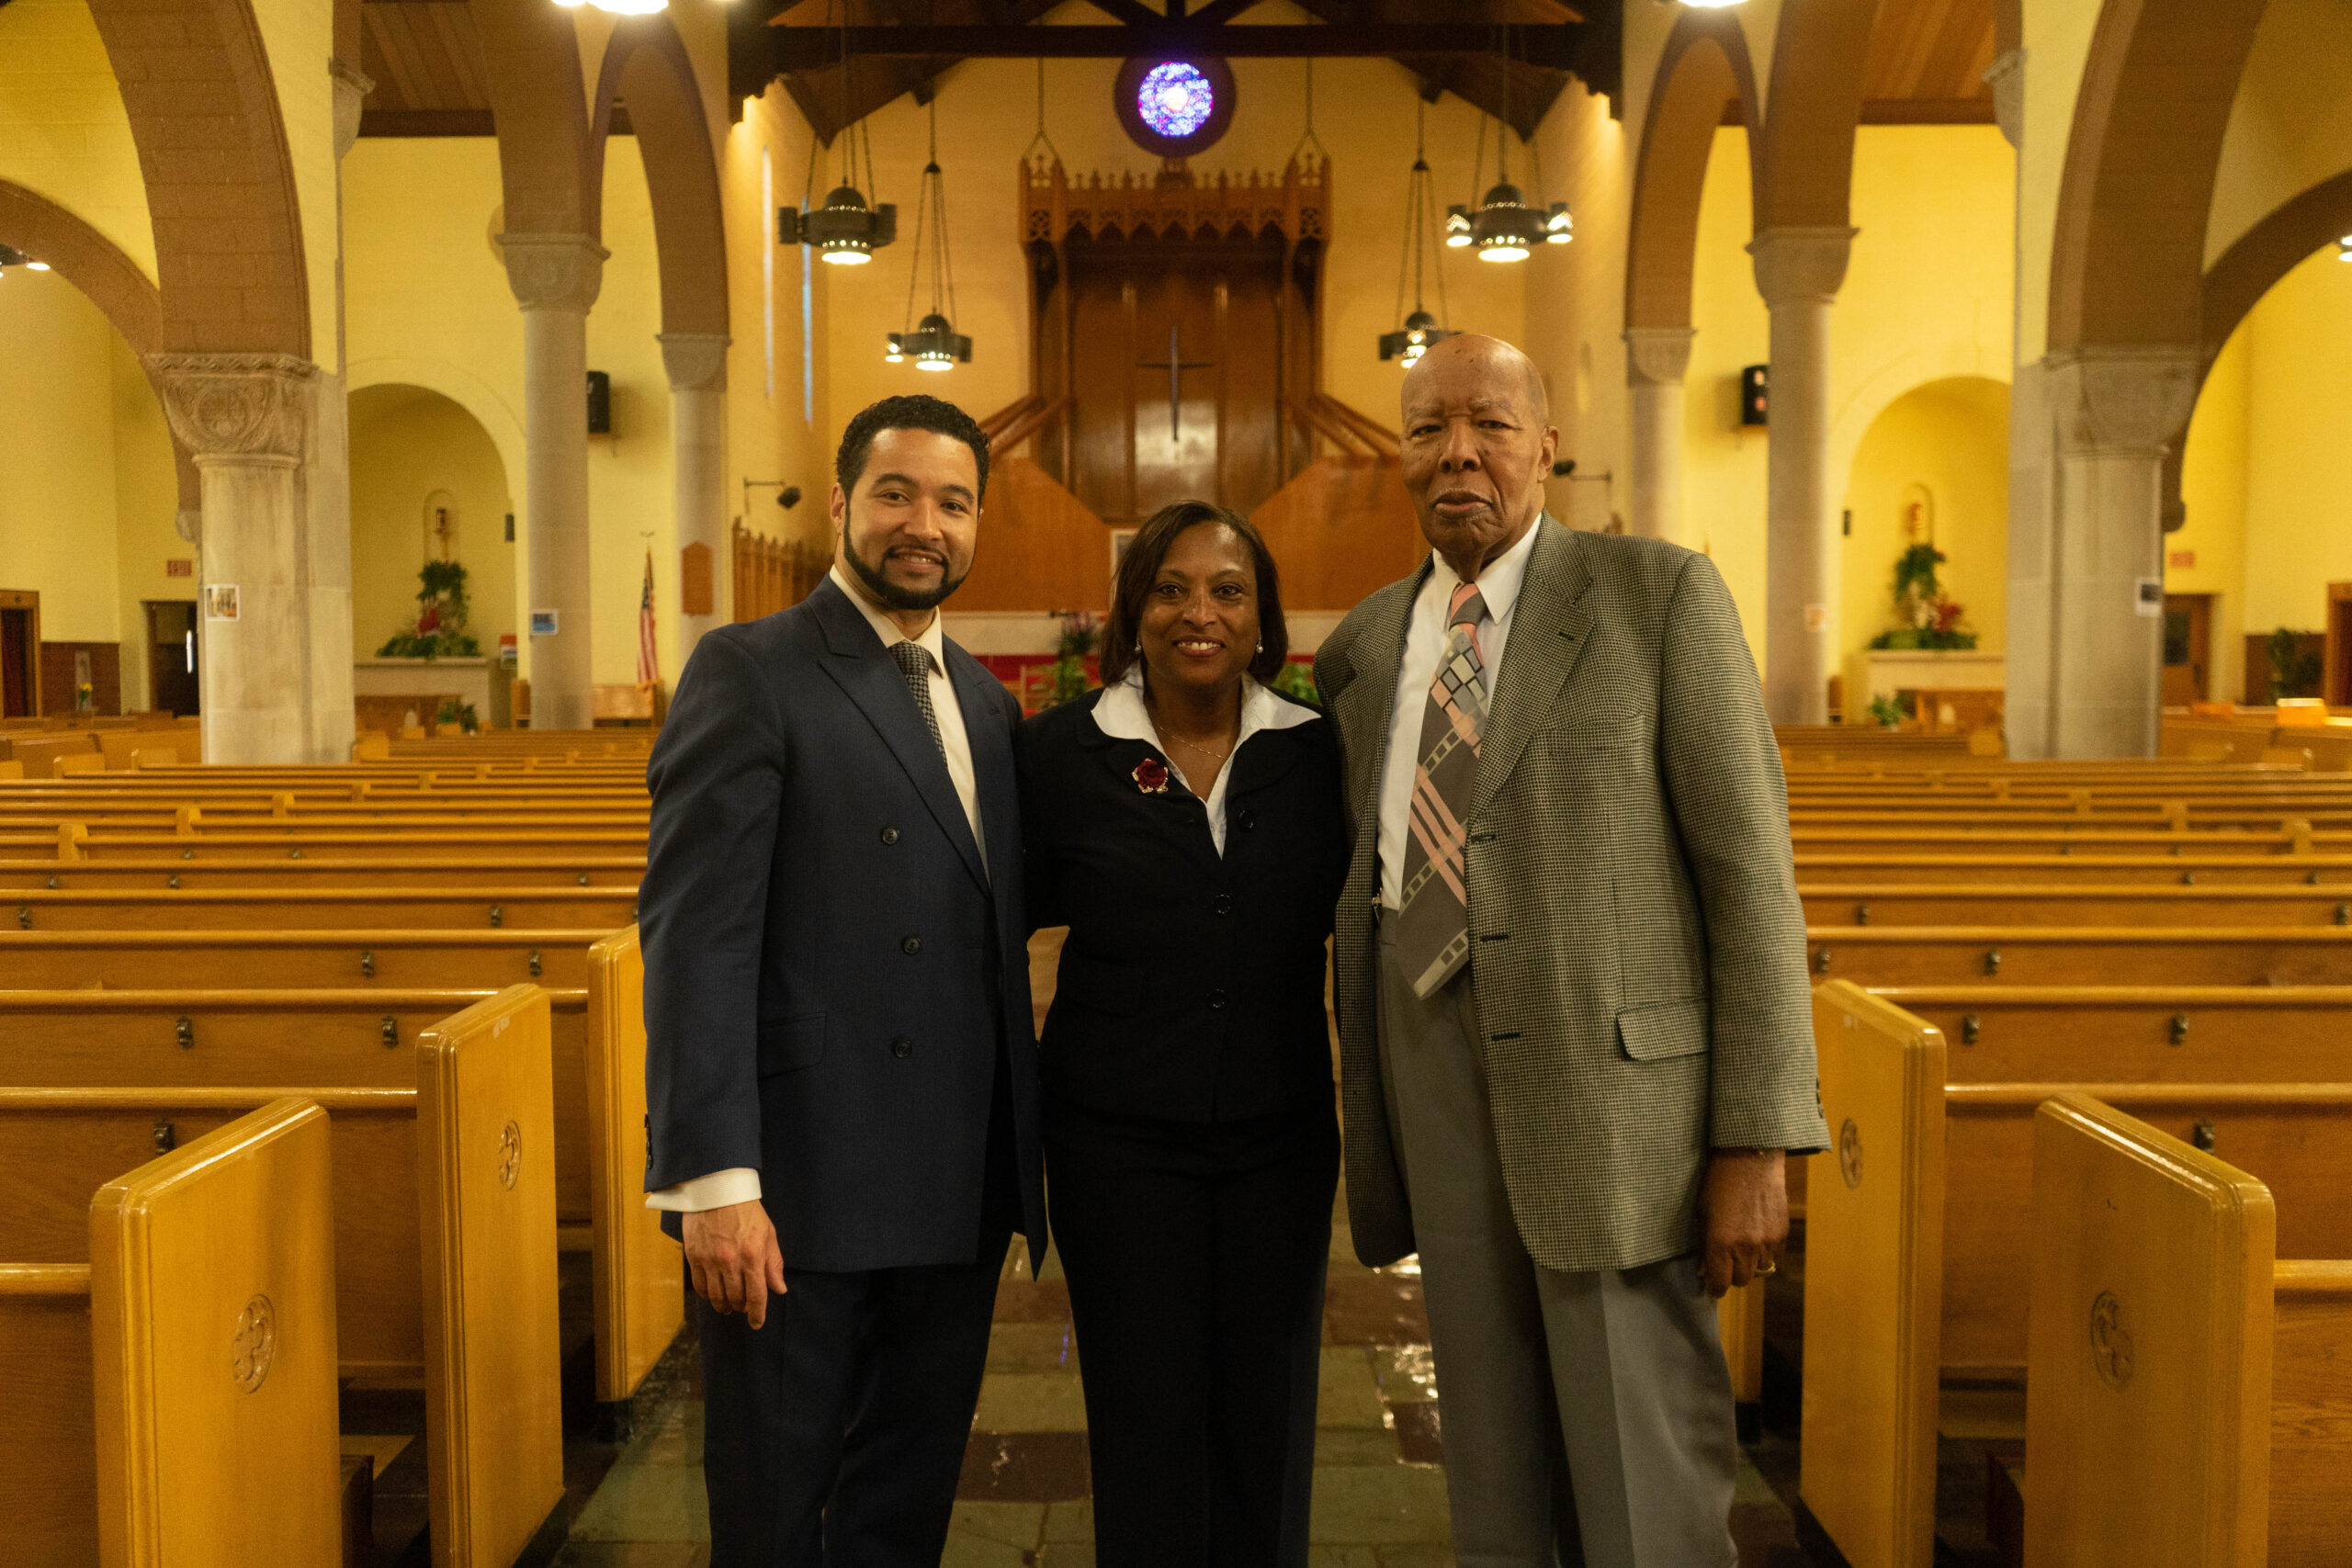 James Cole Foundation Commonwealth Event, three people smiling inside a church